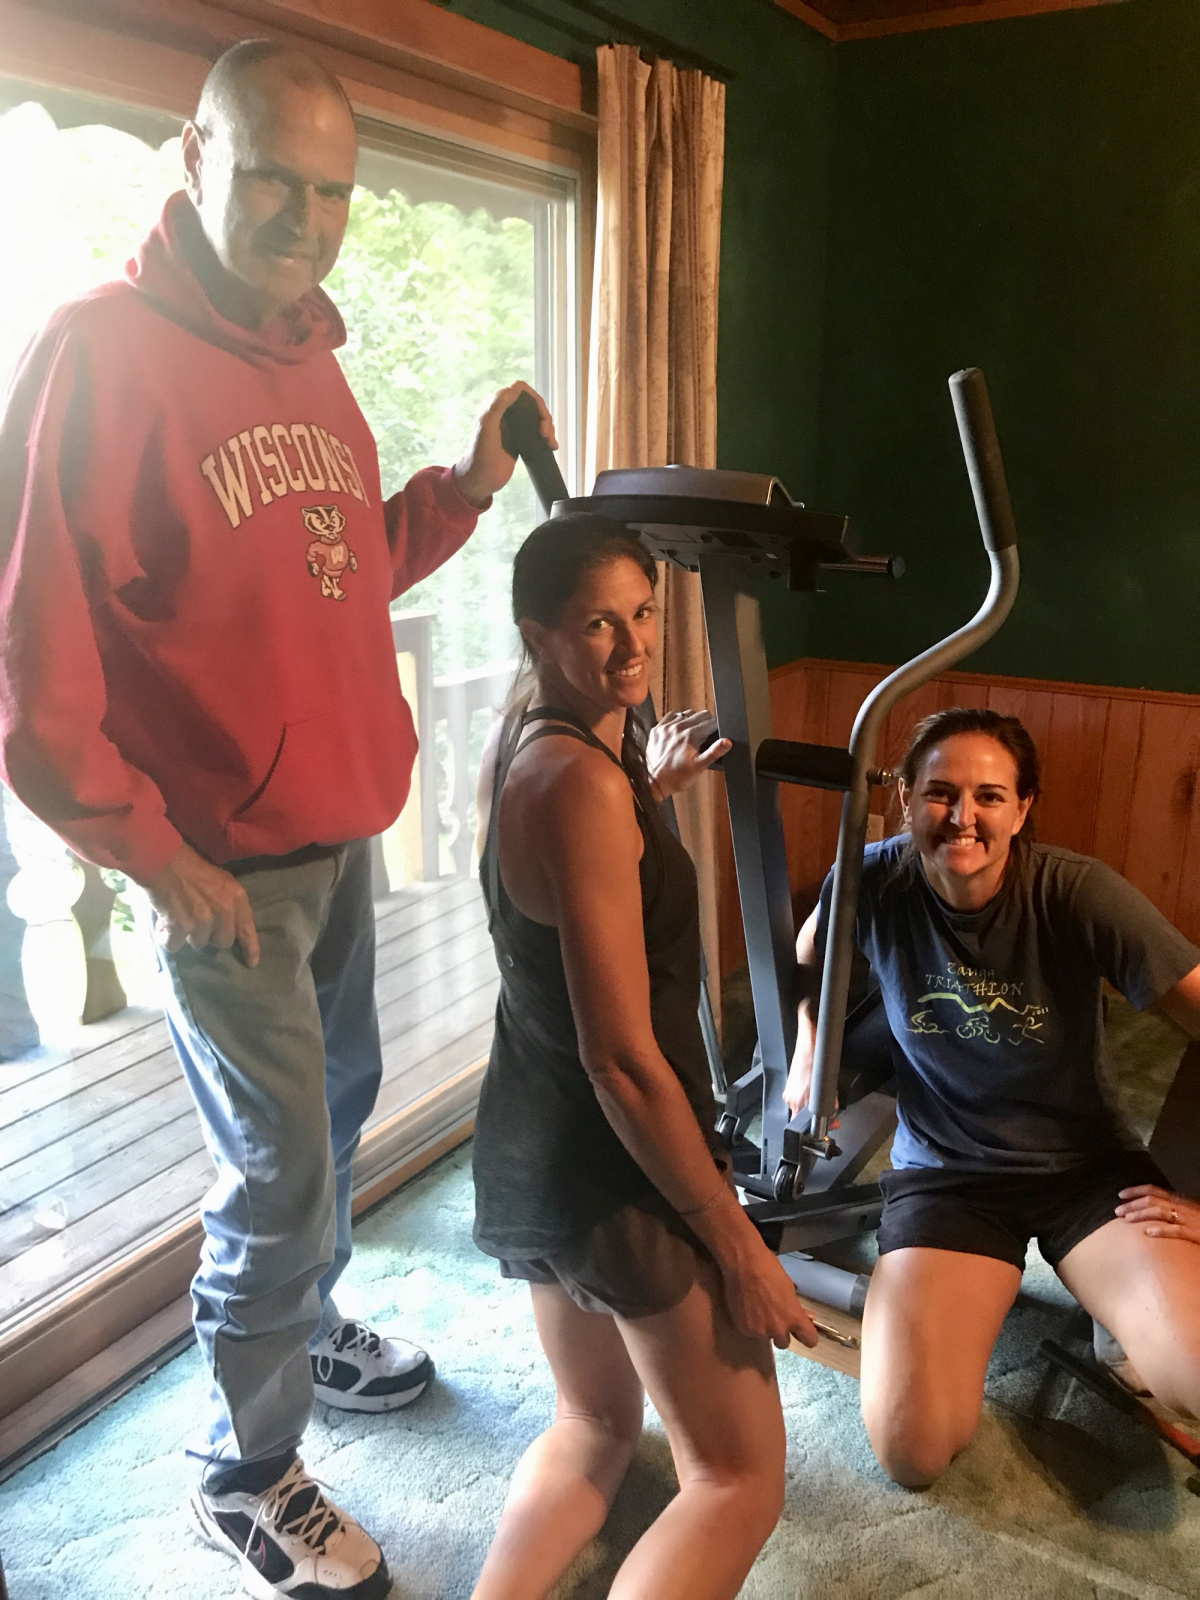 Jessie & Jinelle transform bedroom into workout room with Chuck's help